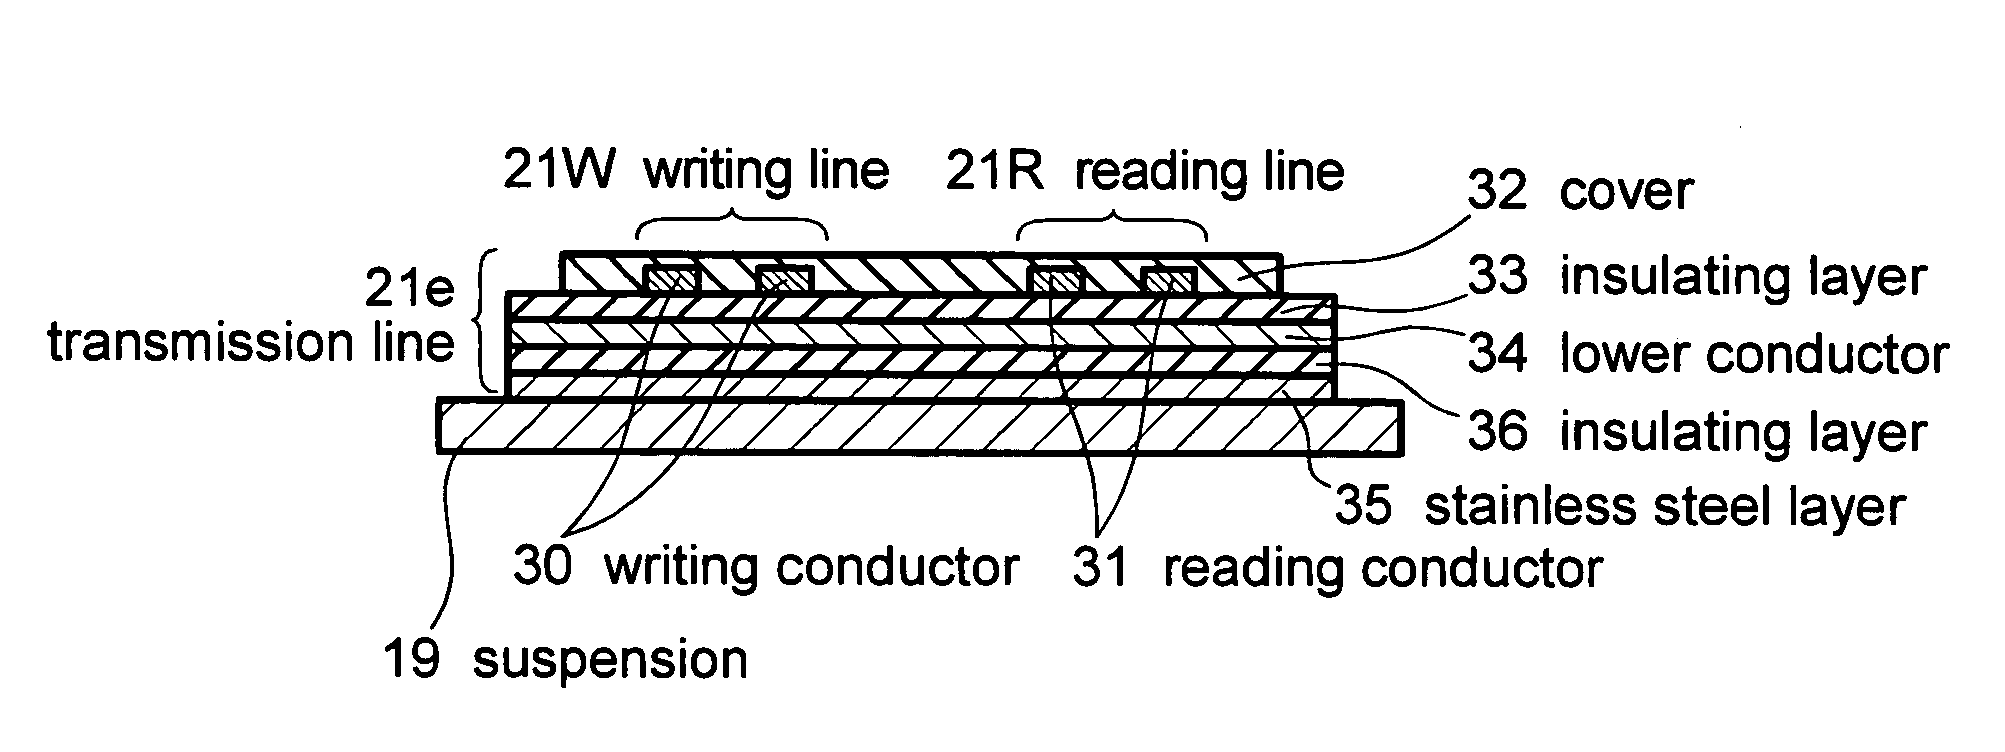 Magnetic disk drive having a suspension mounted transmission line including read and write conductors and a lower conductor